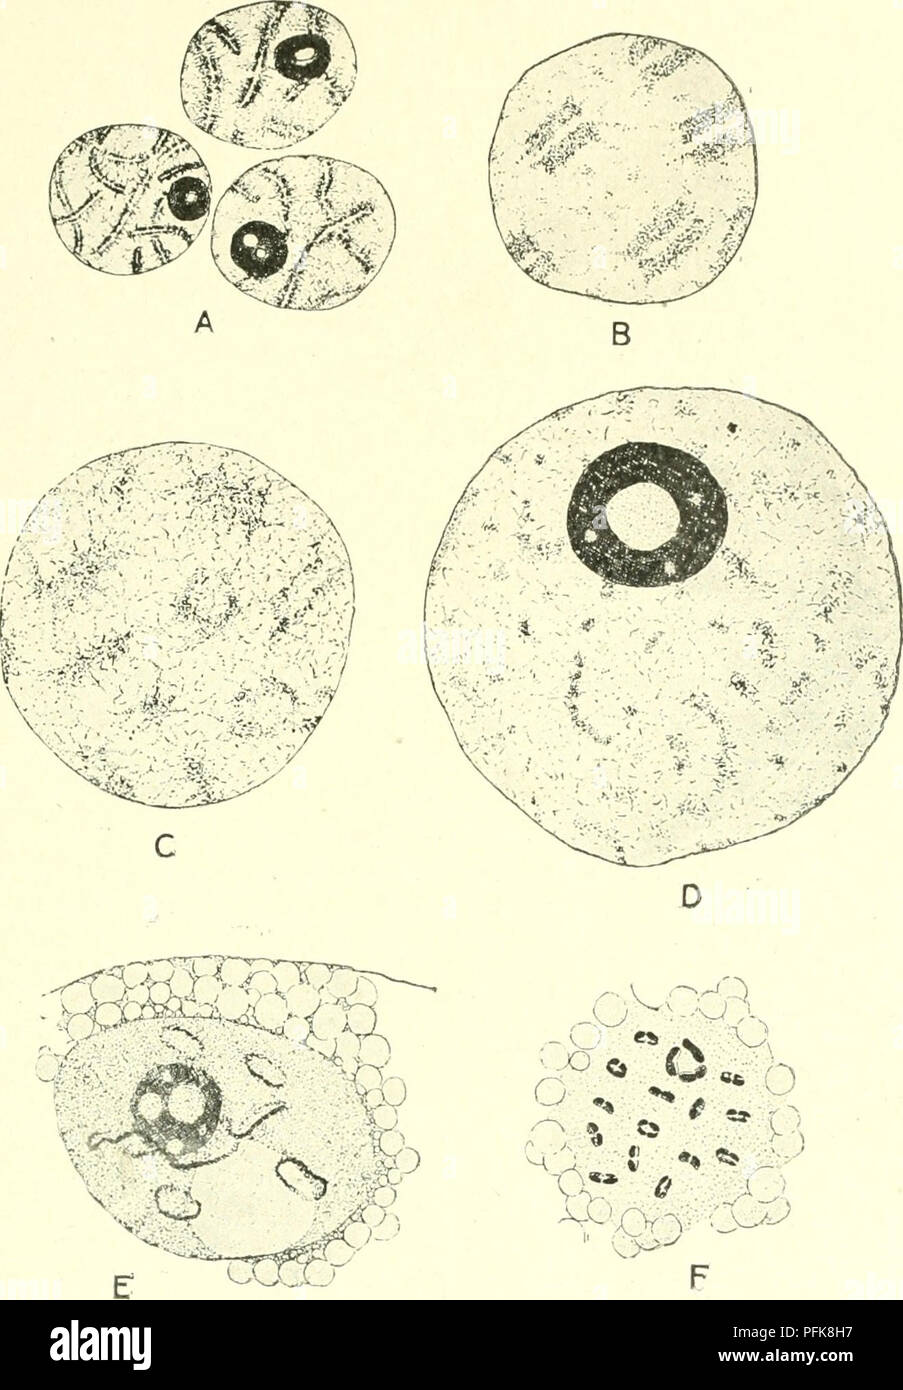 . Cytology, with special reference to the metazoan nucleus. Cells; Cytology. MEIOSIS IN THE FEMALE 6i germinal vesicles with diffuse chromosomes are to be found, and it is evident that the bivalents resulting from syndesis condense continuously. Fig. 25. The chromosomes during the oogenesis of Diaptomus castor from the pachytene stage (A), through the germinal vesicle stage (B-E) to the condensation of the definitive bivalents (F). (Matschek, A.Z., 1910.) into the definitive bivalents of metaphase I. Animals, however, which are carrying egg-sacs contain in their oviducts oocytes with well-deve Stock Photo